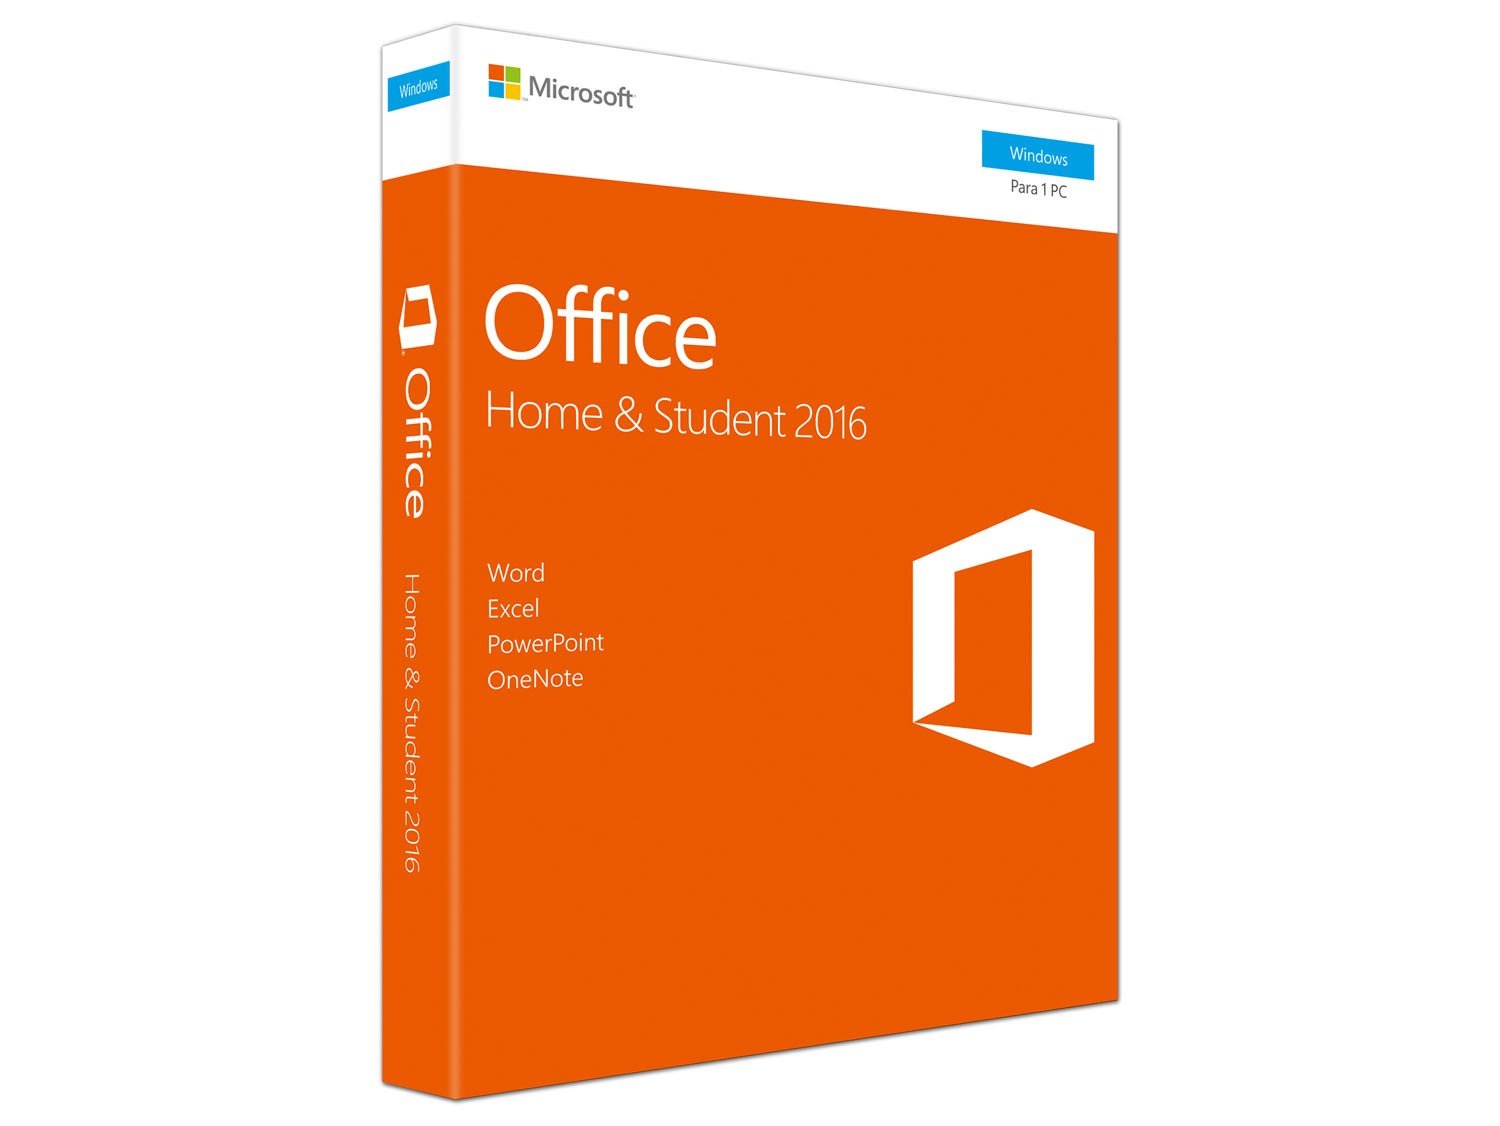 microsoft office home & student 2016 for mac review